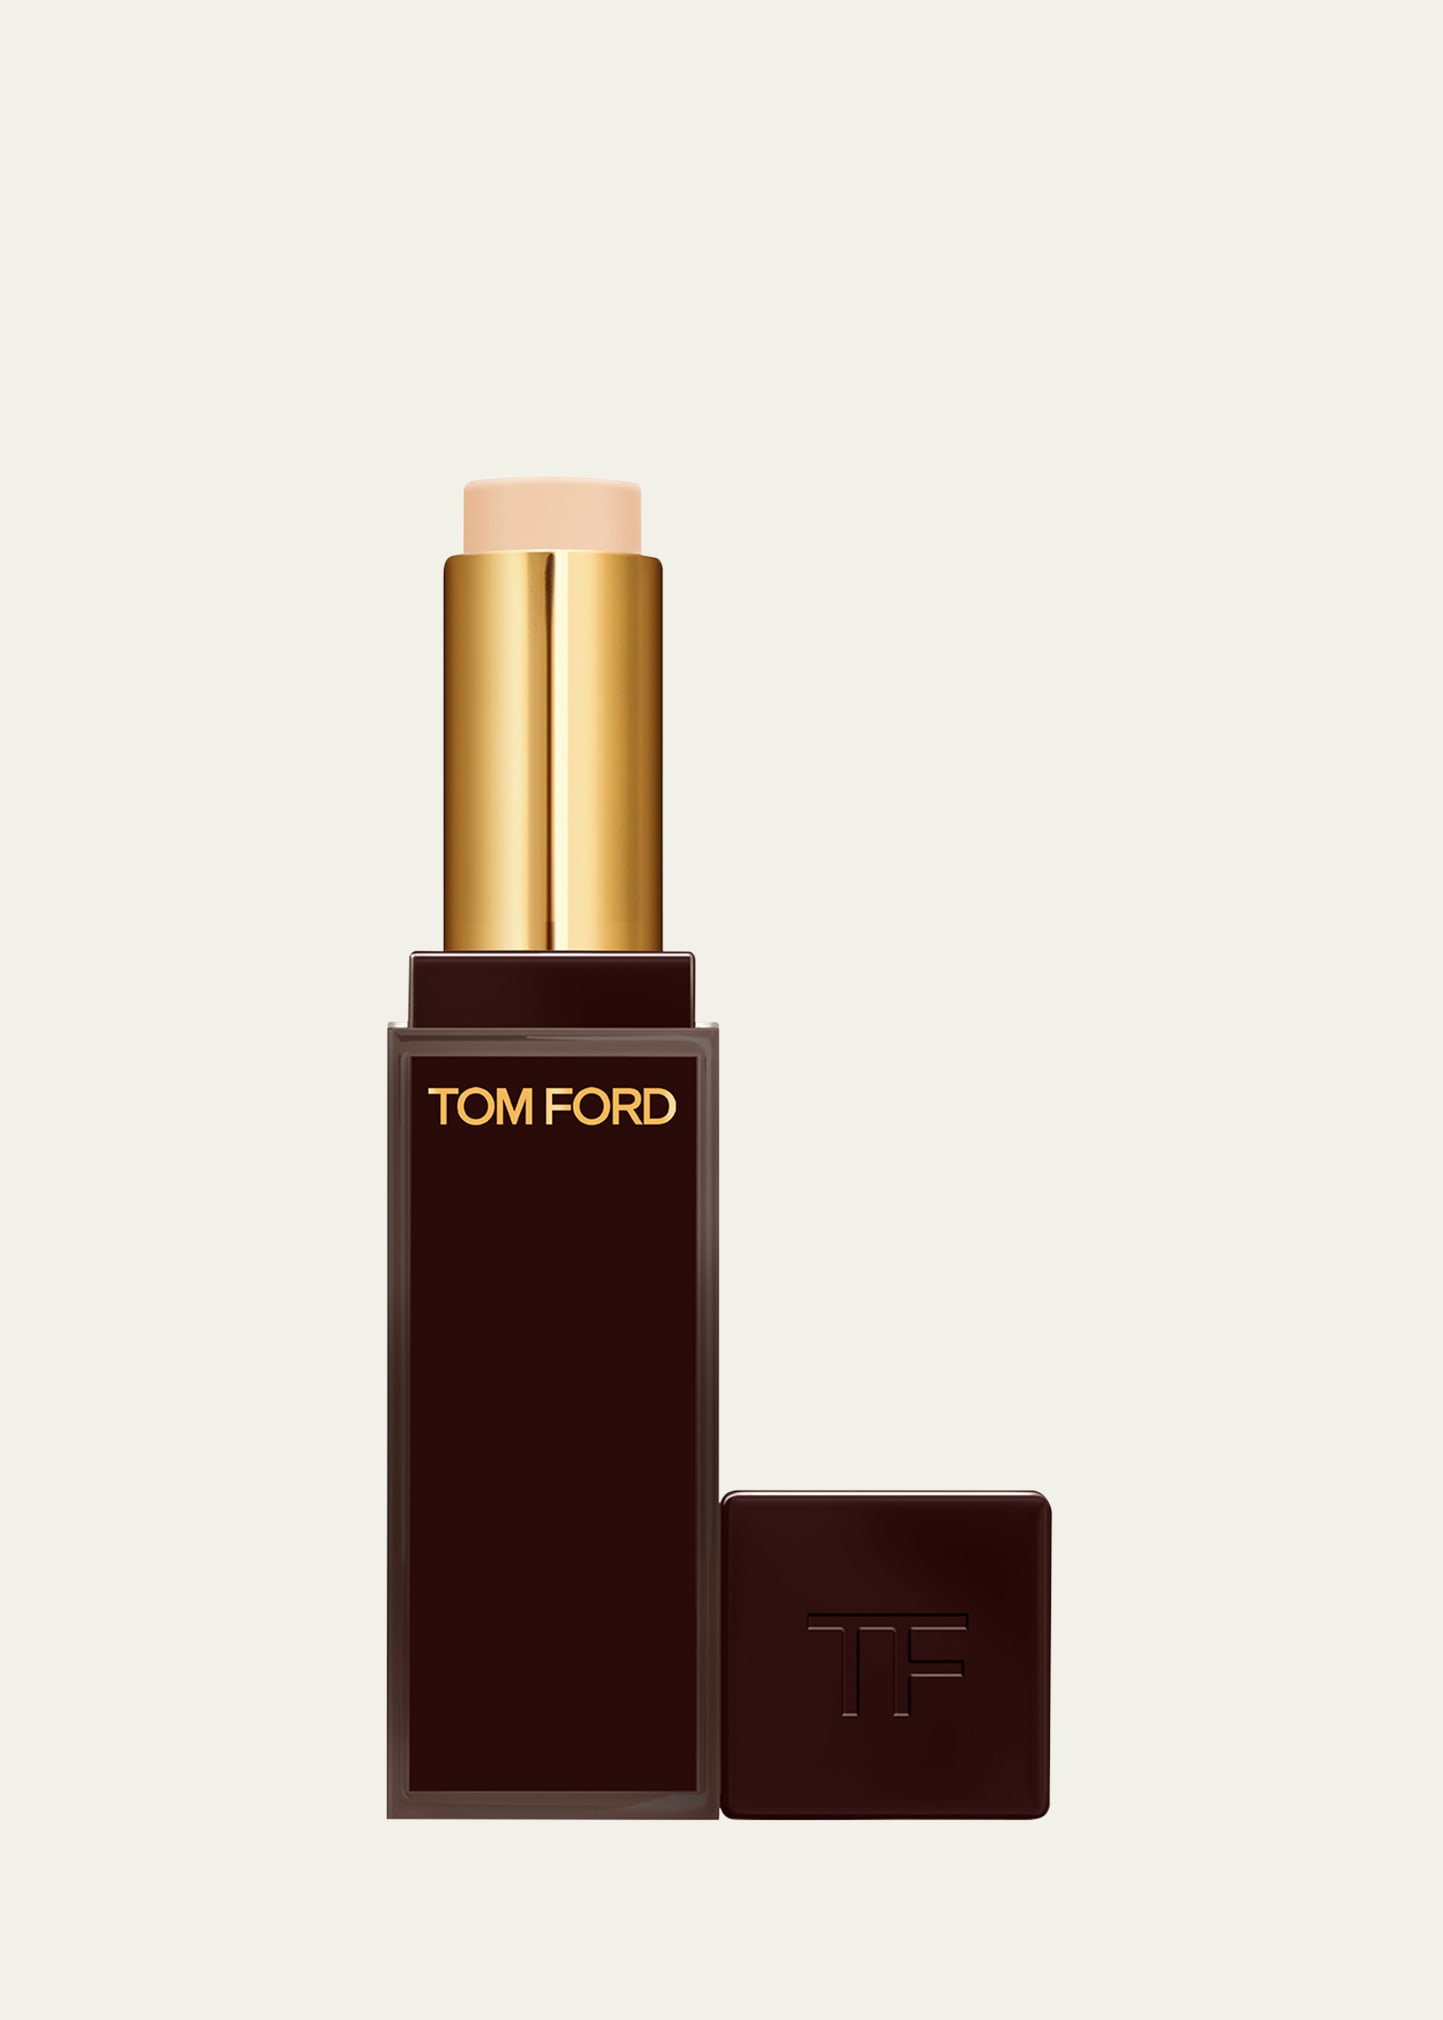 Tom Ford Traceless Soft Matte Concealer, 0.14 Oz. In 030w0 Shell